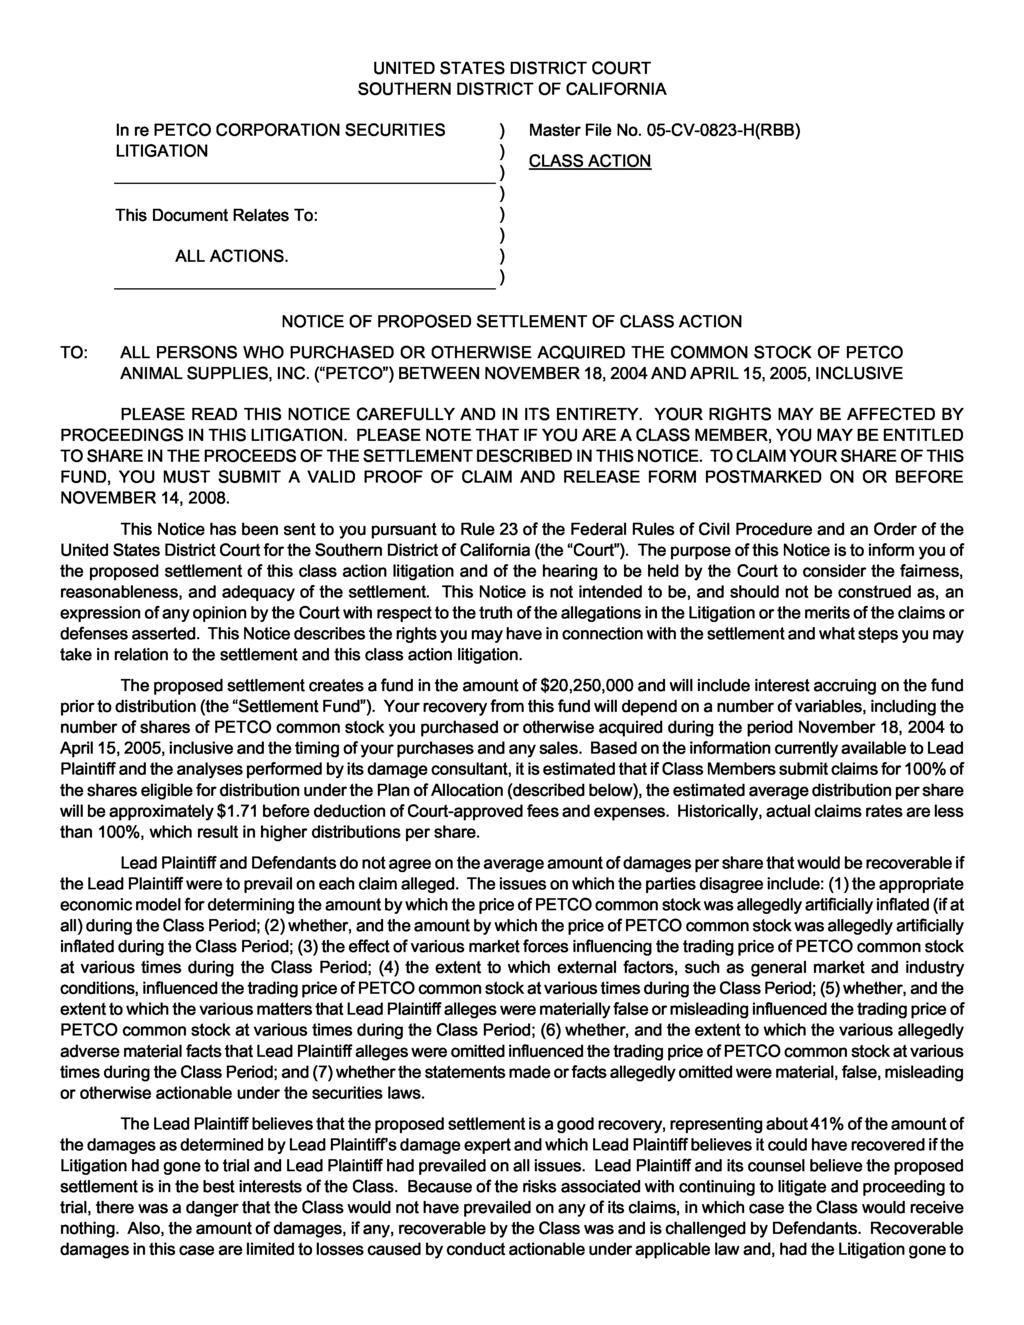 UNITED STATES DISTRICT COURT SOUTHERN DISTRICT OF CALIFORNIA In re PETCO CORPORATION SECURITIES LITIGATION Master File No. 05-CV-0823- H(RBB) CLASS ACTION This Document Relates To: ALL ACTIONS.